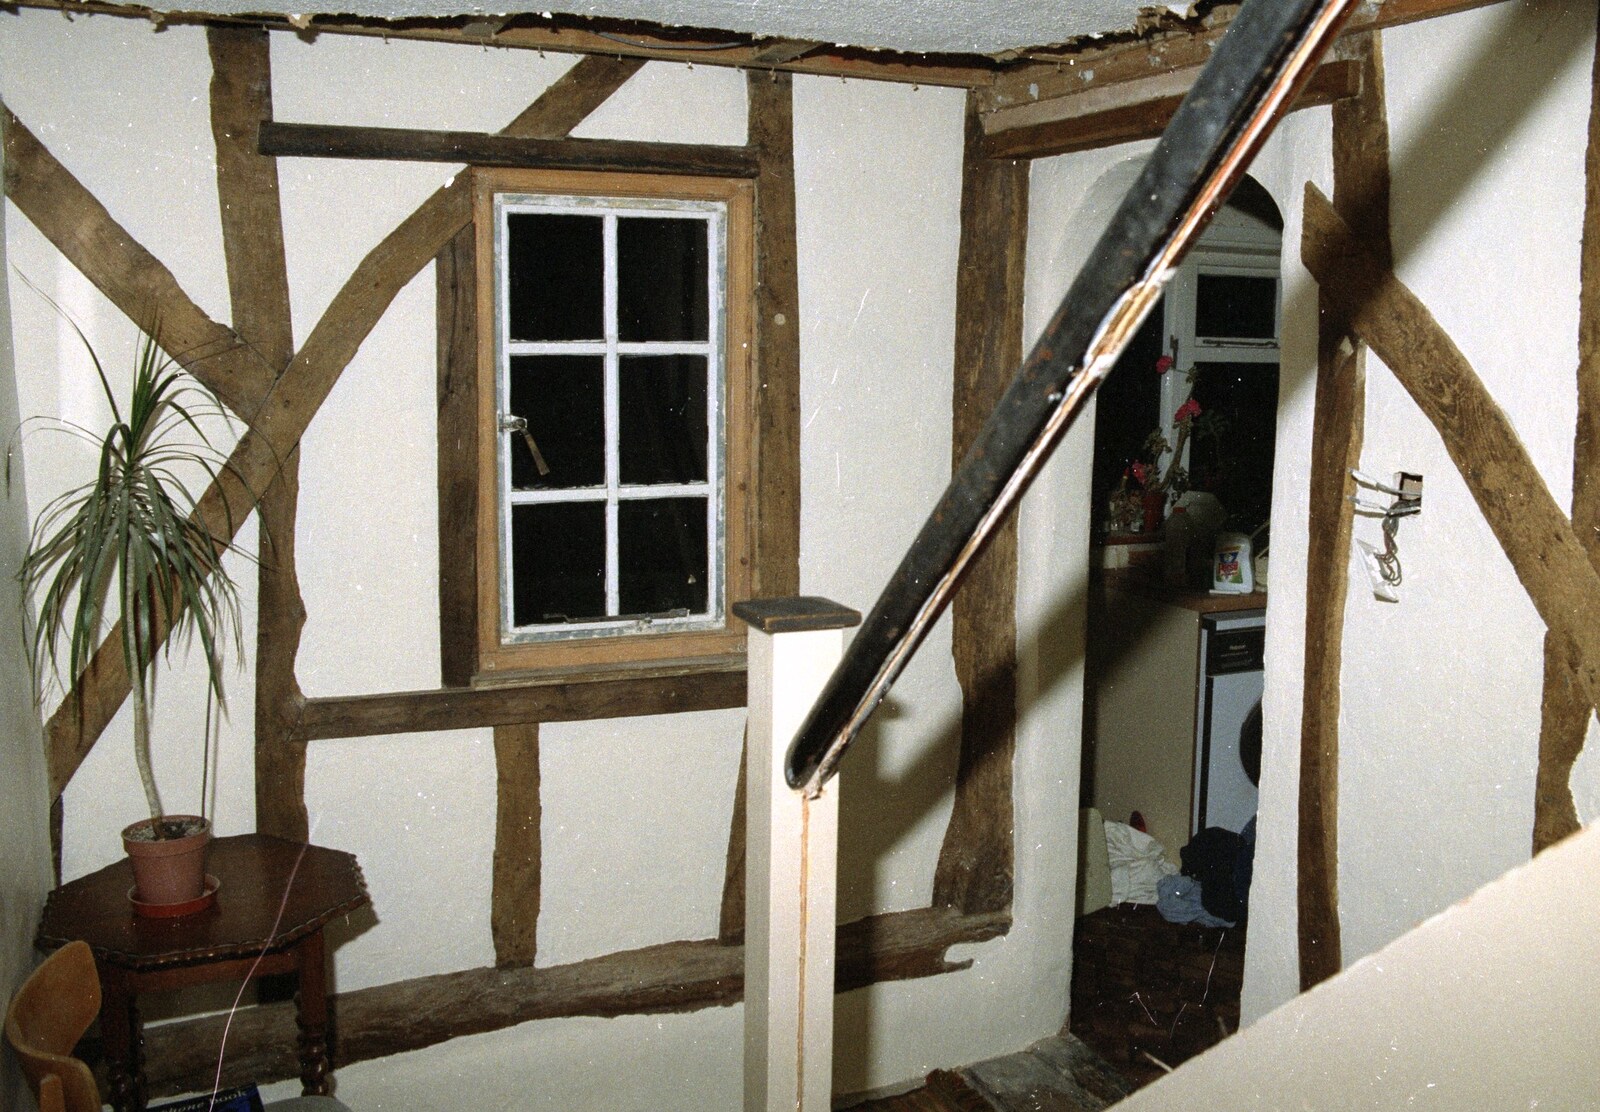 Grandmother's Seventieth Birthday, Brockenhurst and Keyhaven, Hampshire - 11th September 1994: The hall has been painted